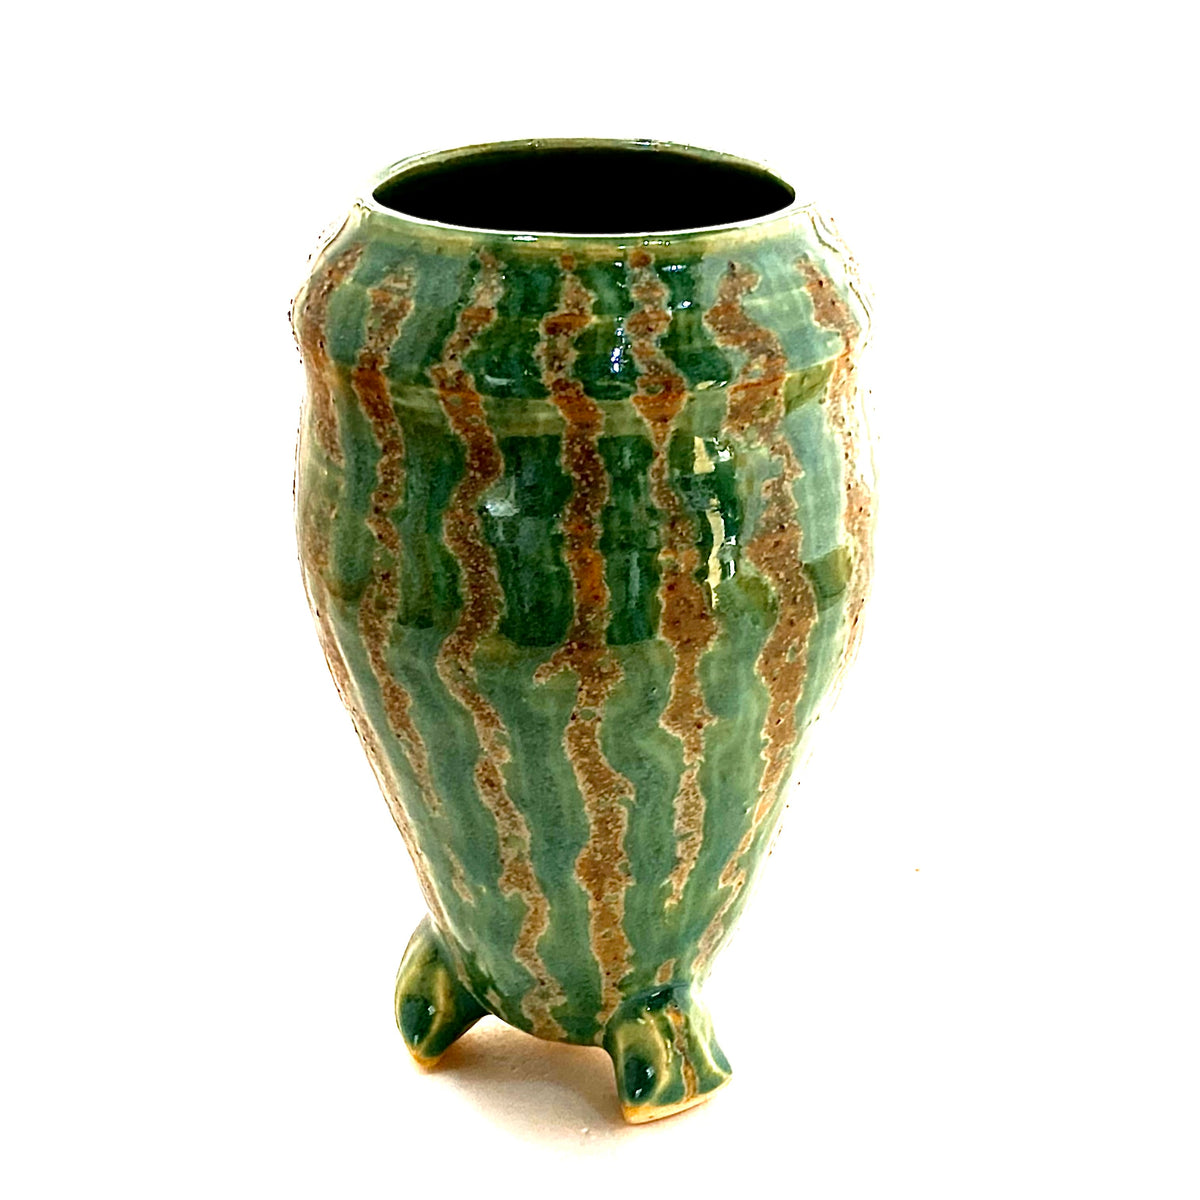 A large three footed green vase